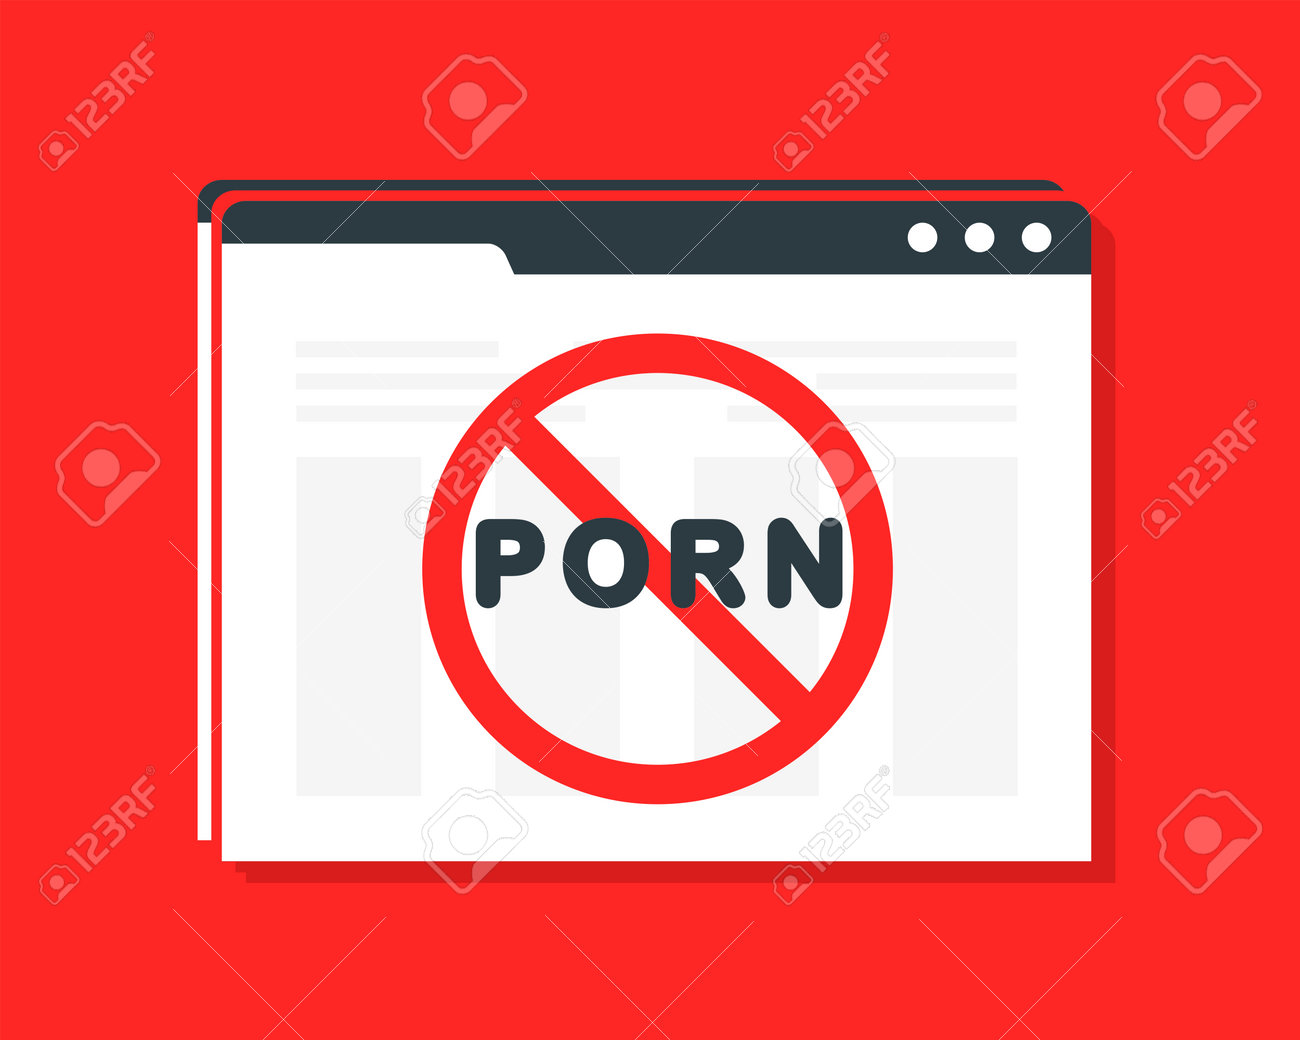 chris randolph recommends porn no sign pic